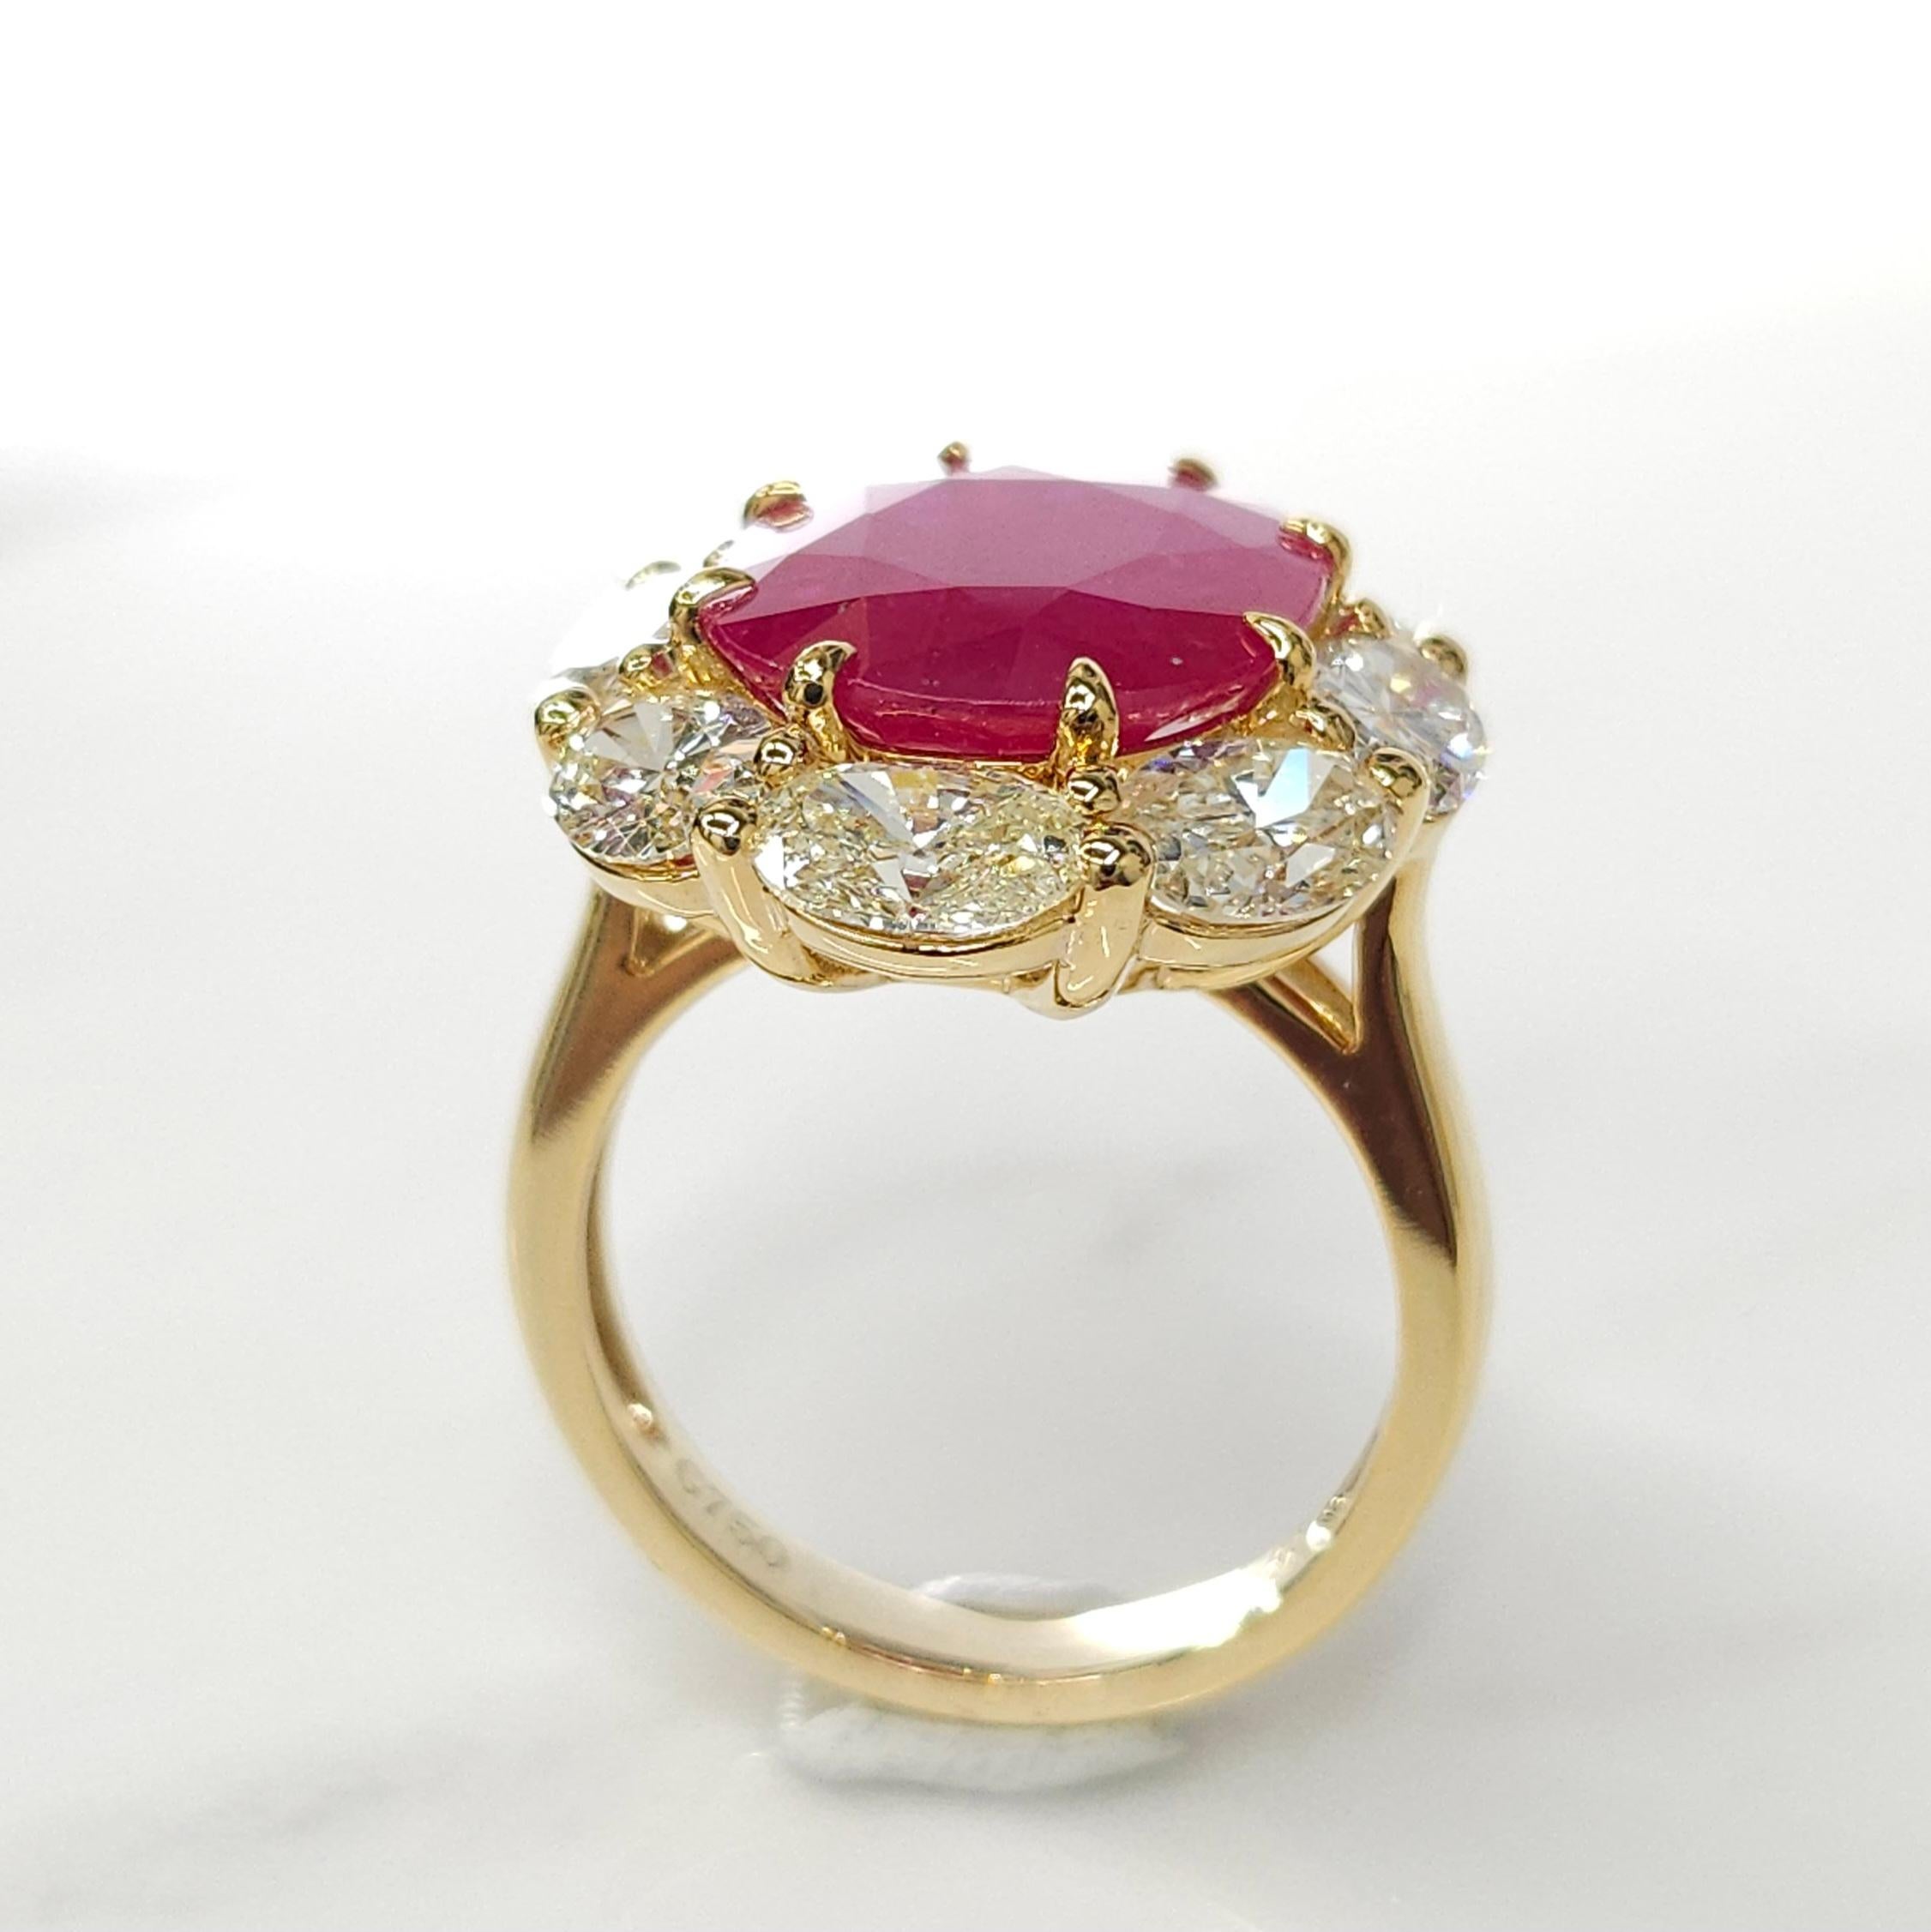 IGI Certified 6.53 Carat Ruby & 3.71 Carat Oval Diamond Ring in 18K Yellow Gold For Sale 1